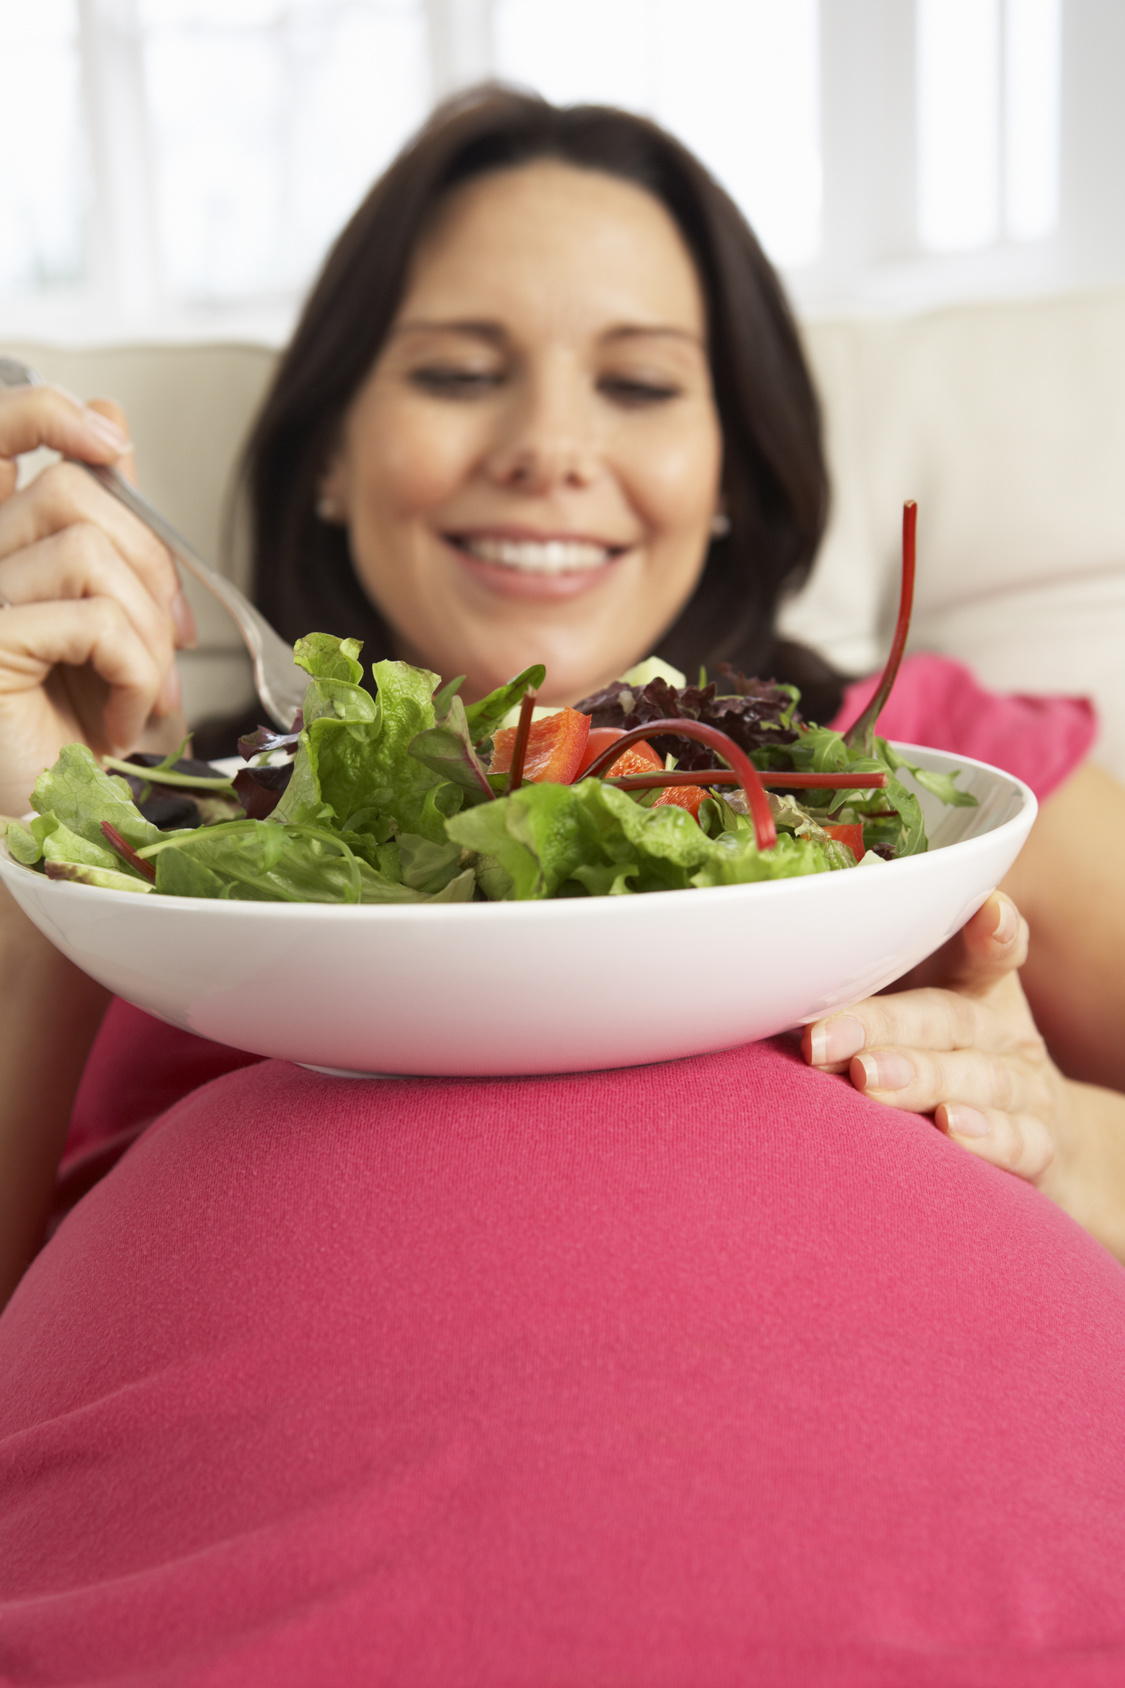 Health Diet is Important During Pregnancy | pregnant woman eating salad photo